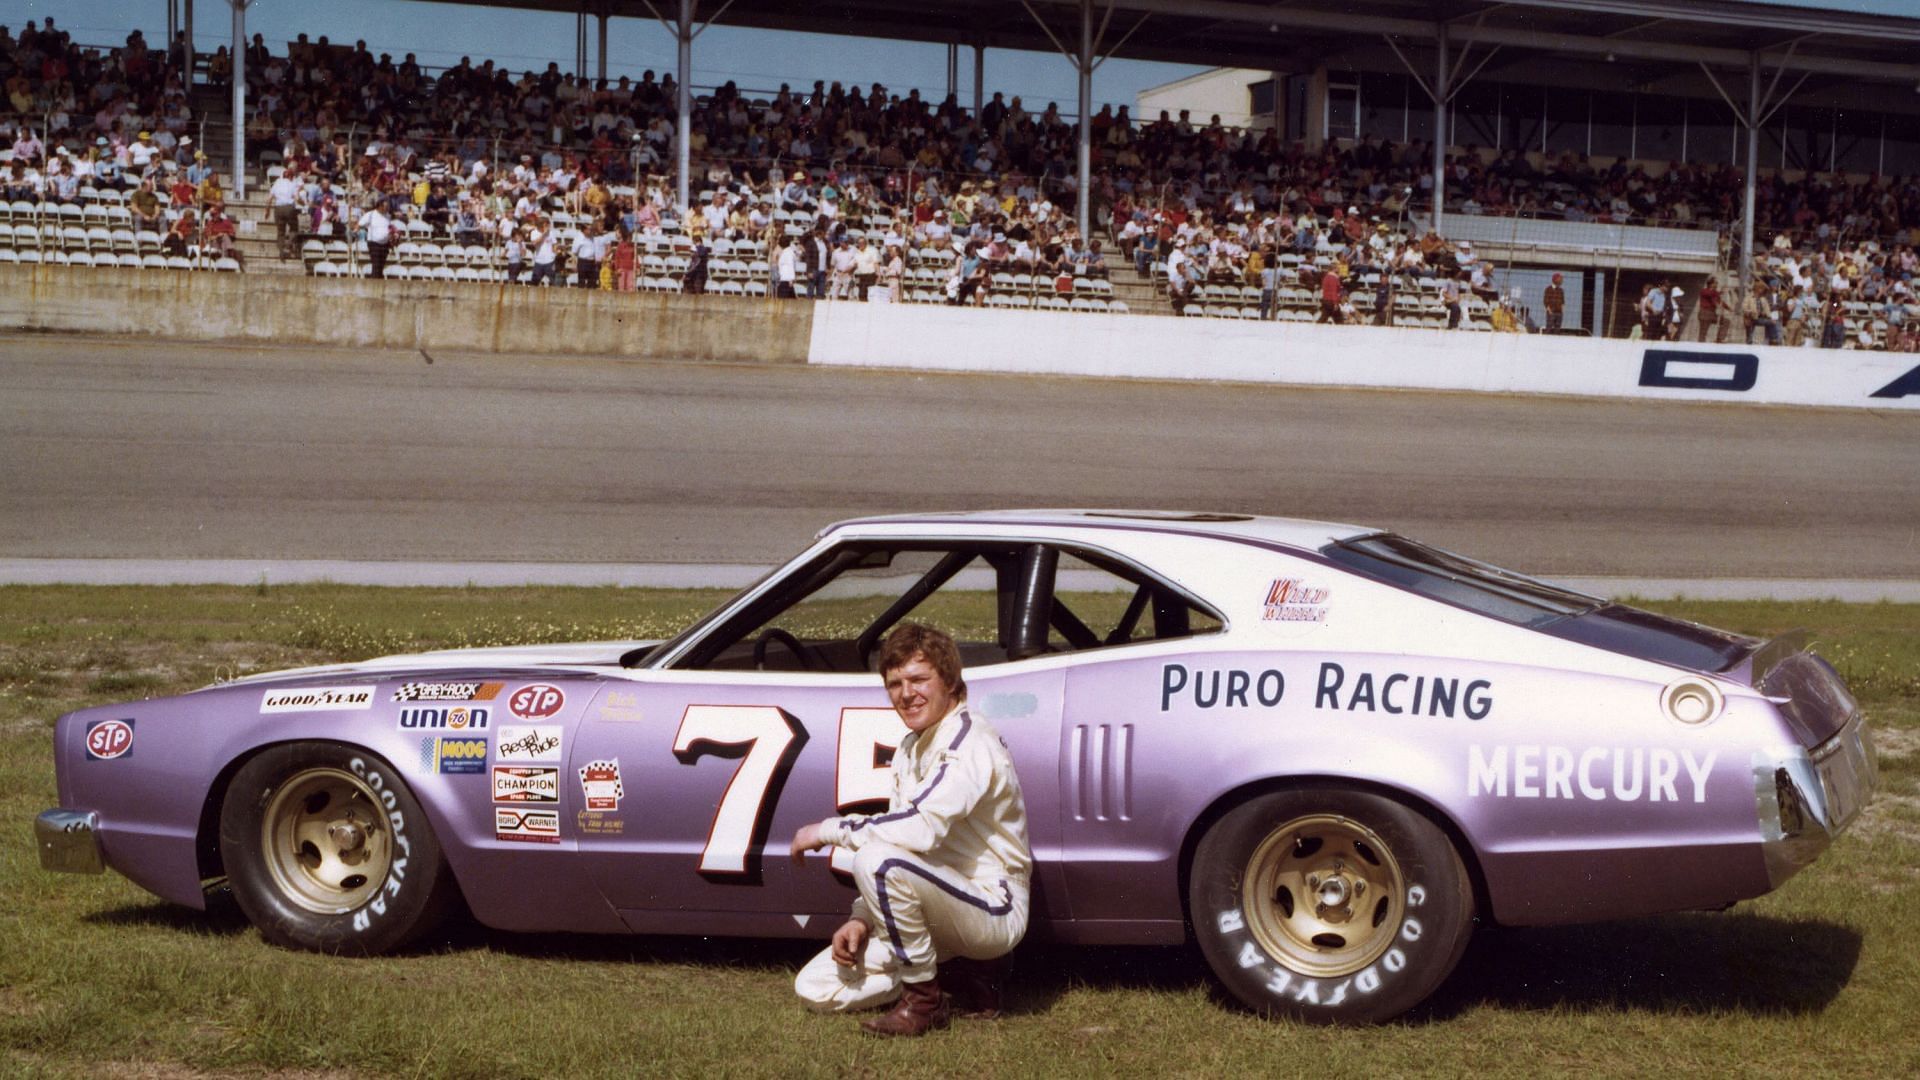 Dick Trickle poses with his #75 Mercury NASCAR at Daytona International Speedway in 1975.